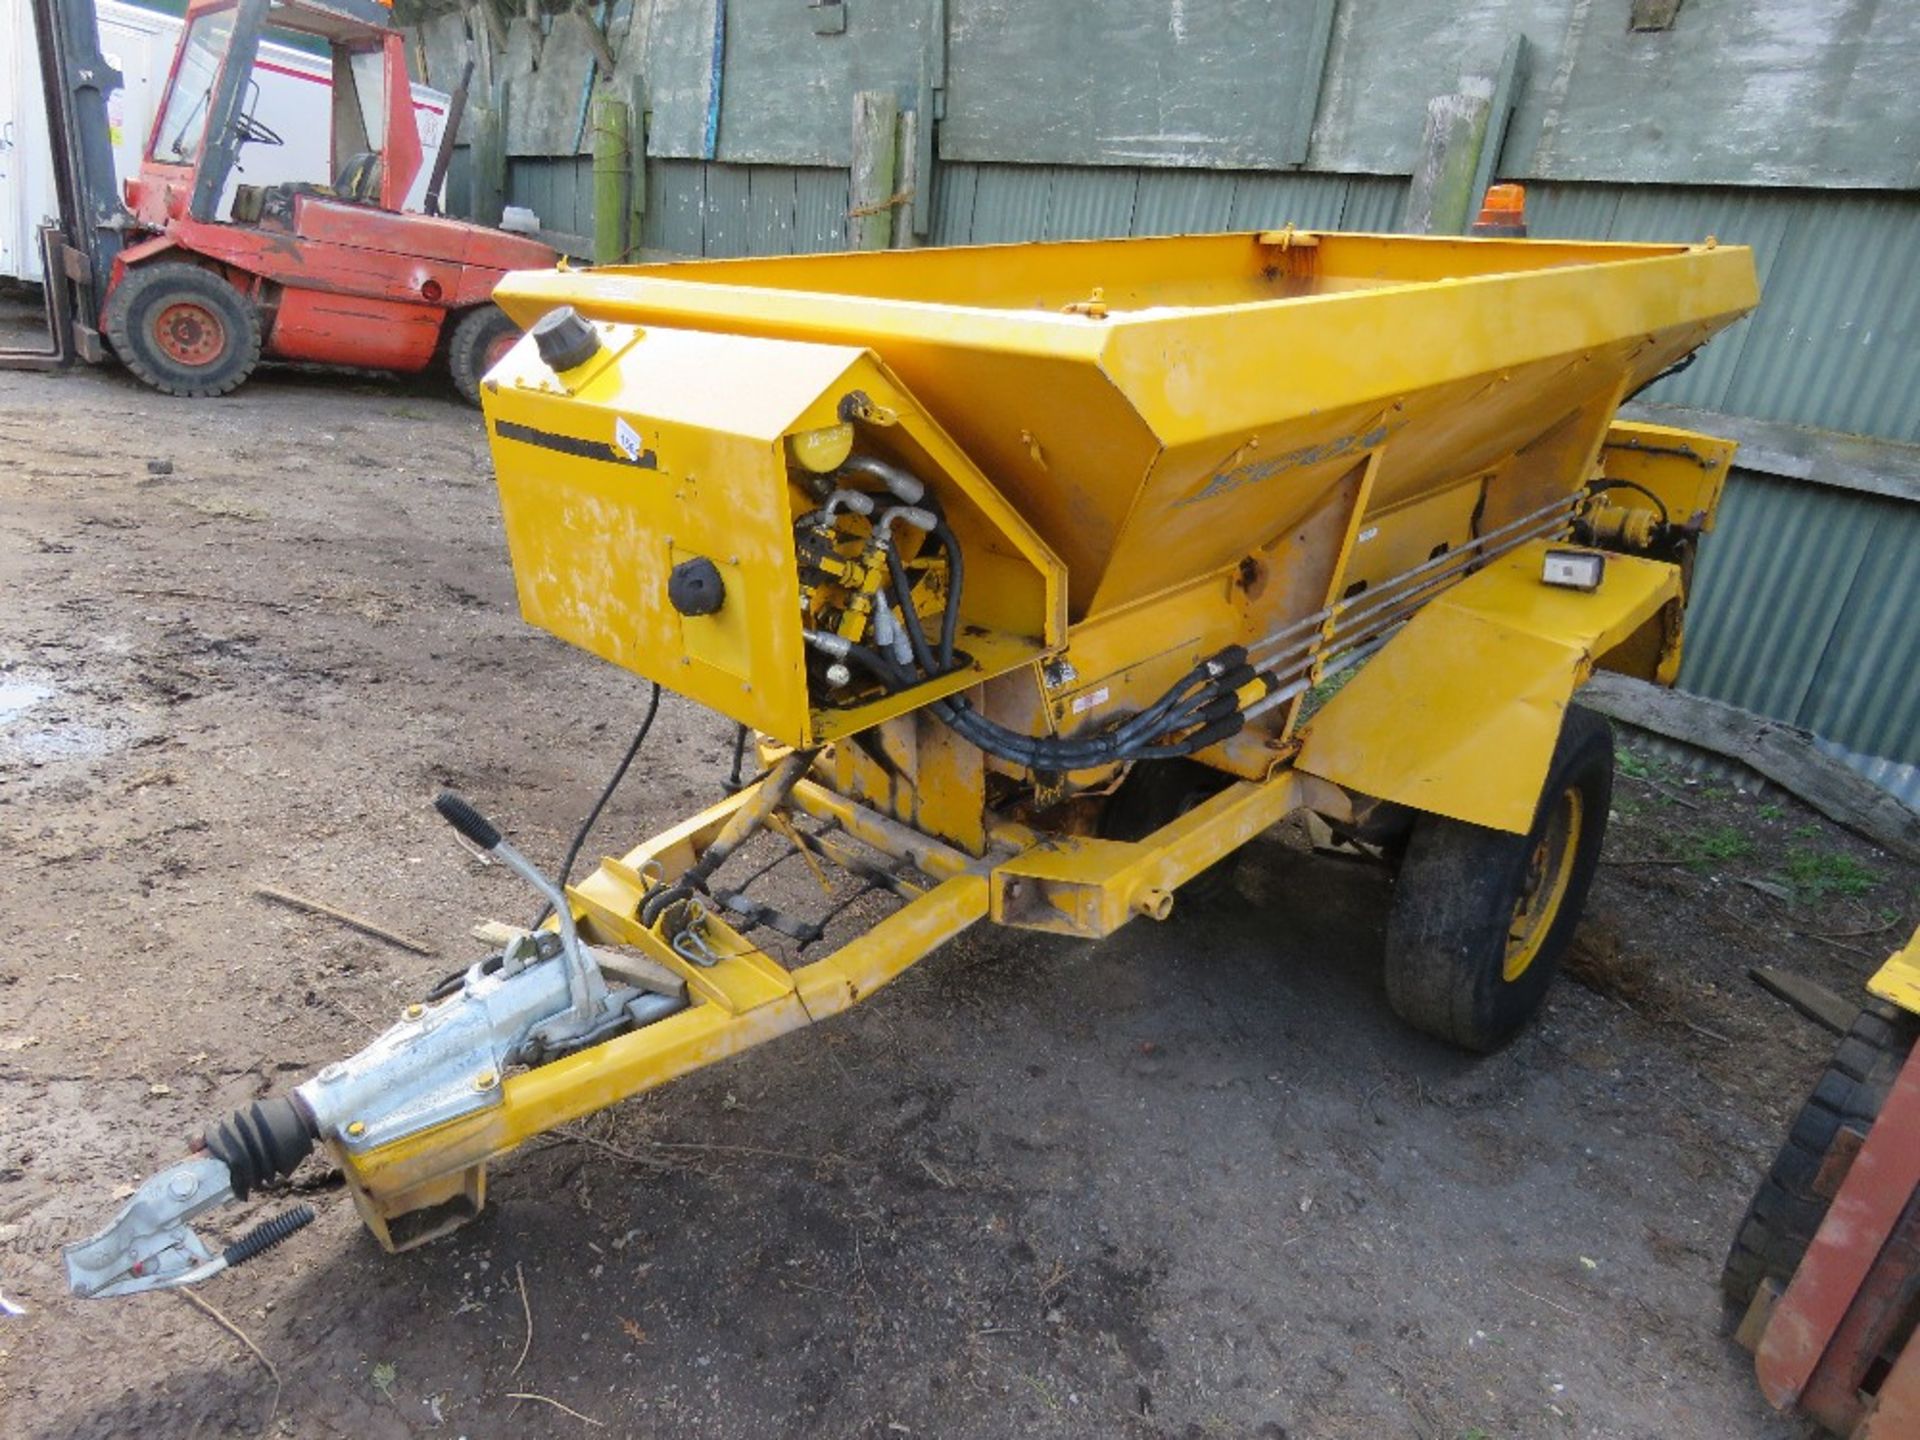 CHARITY LOT!! ECON SINGLE AXLED TOWED SALT SPREADER WITH WHEEL DRIVEN HYDRAULIC SYSTEM. UNUSED FOR - Image 10 of 13